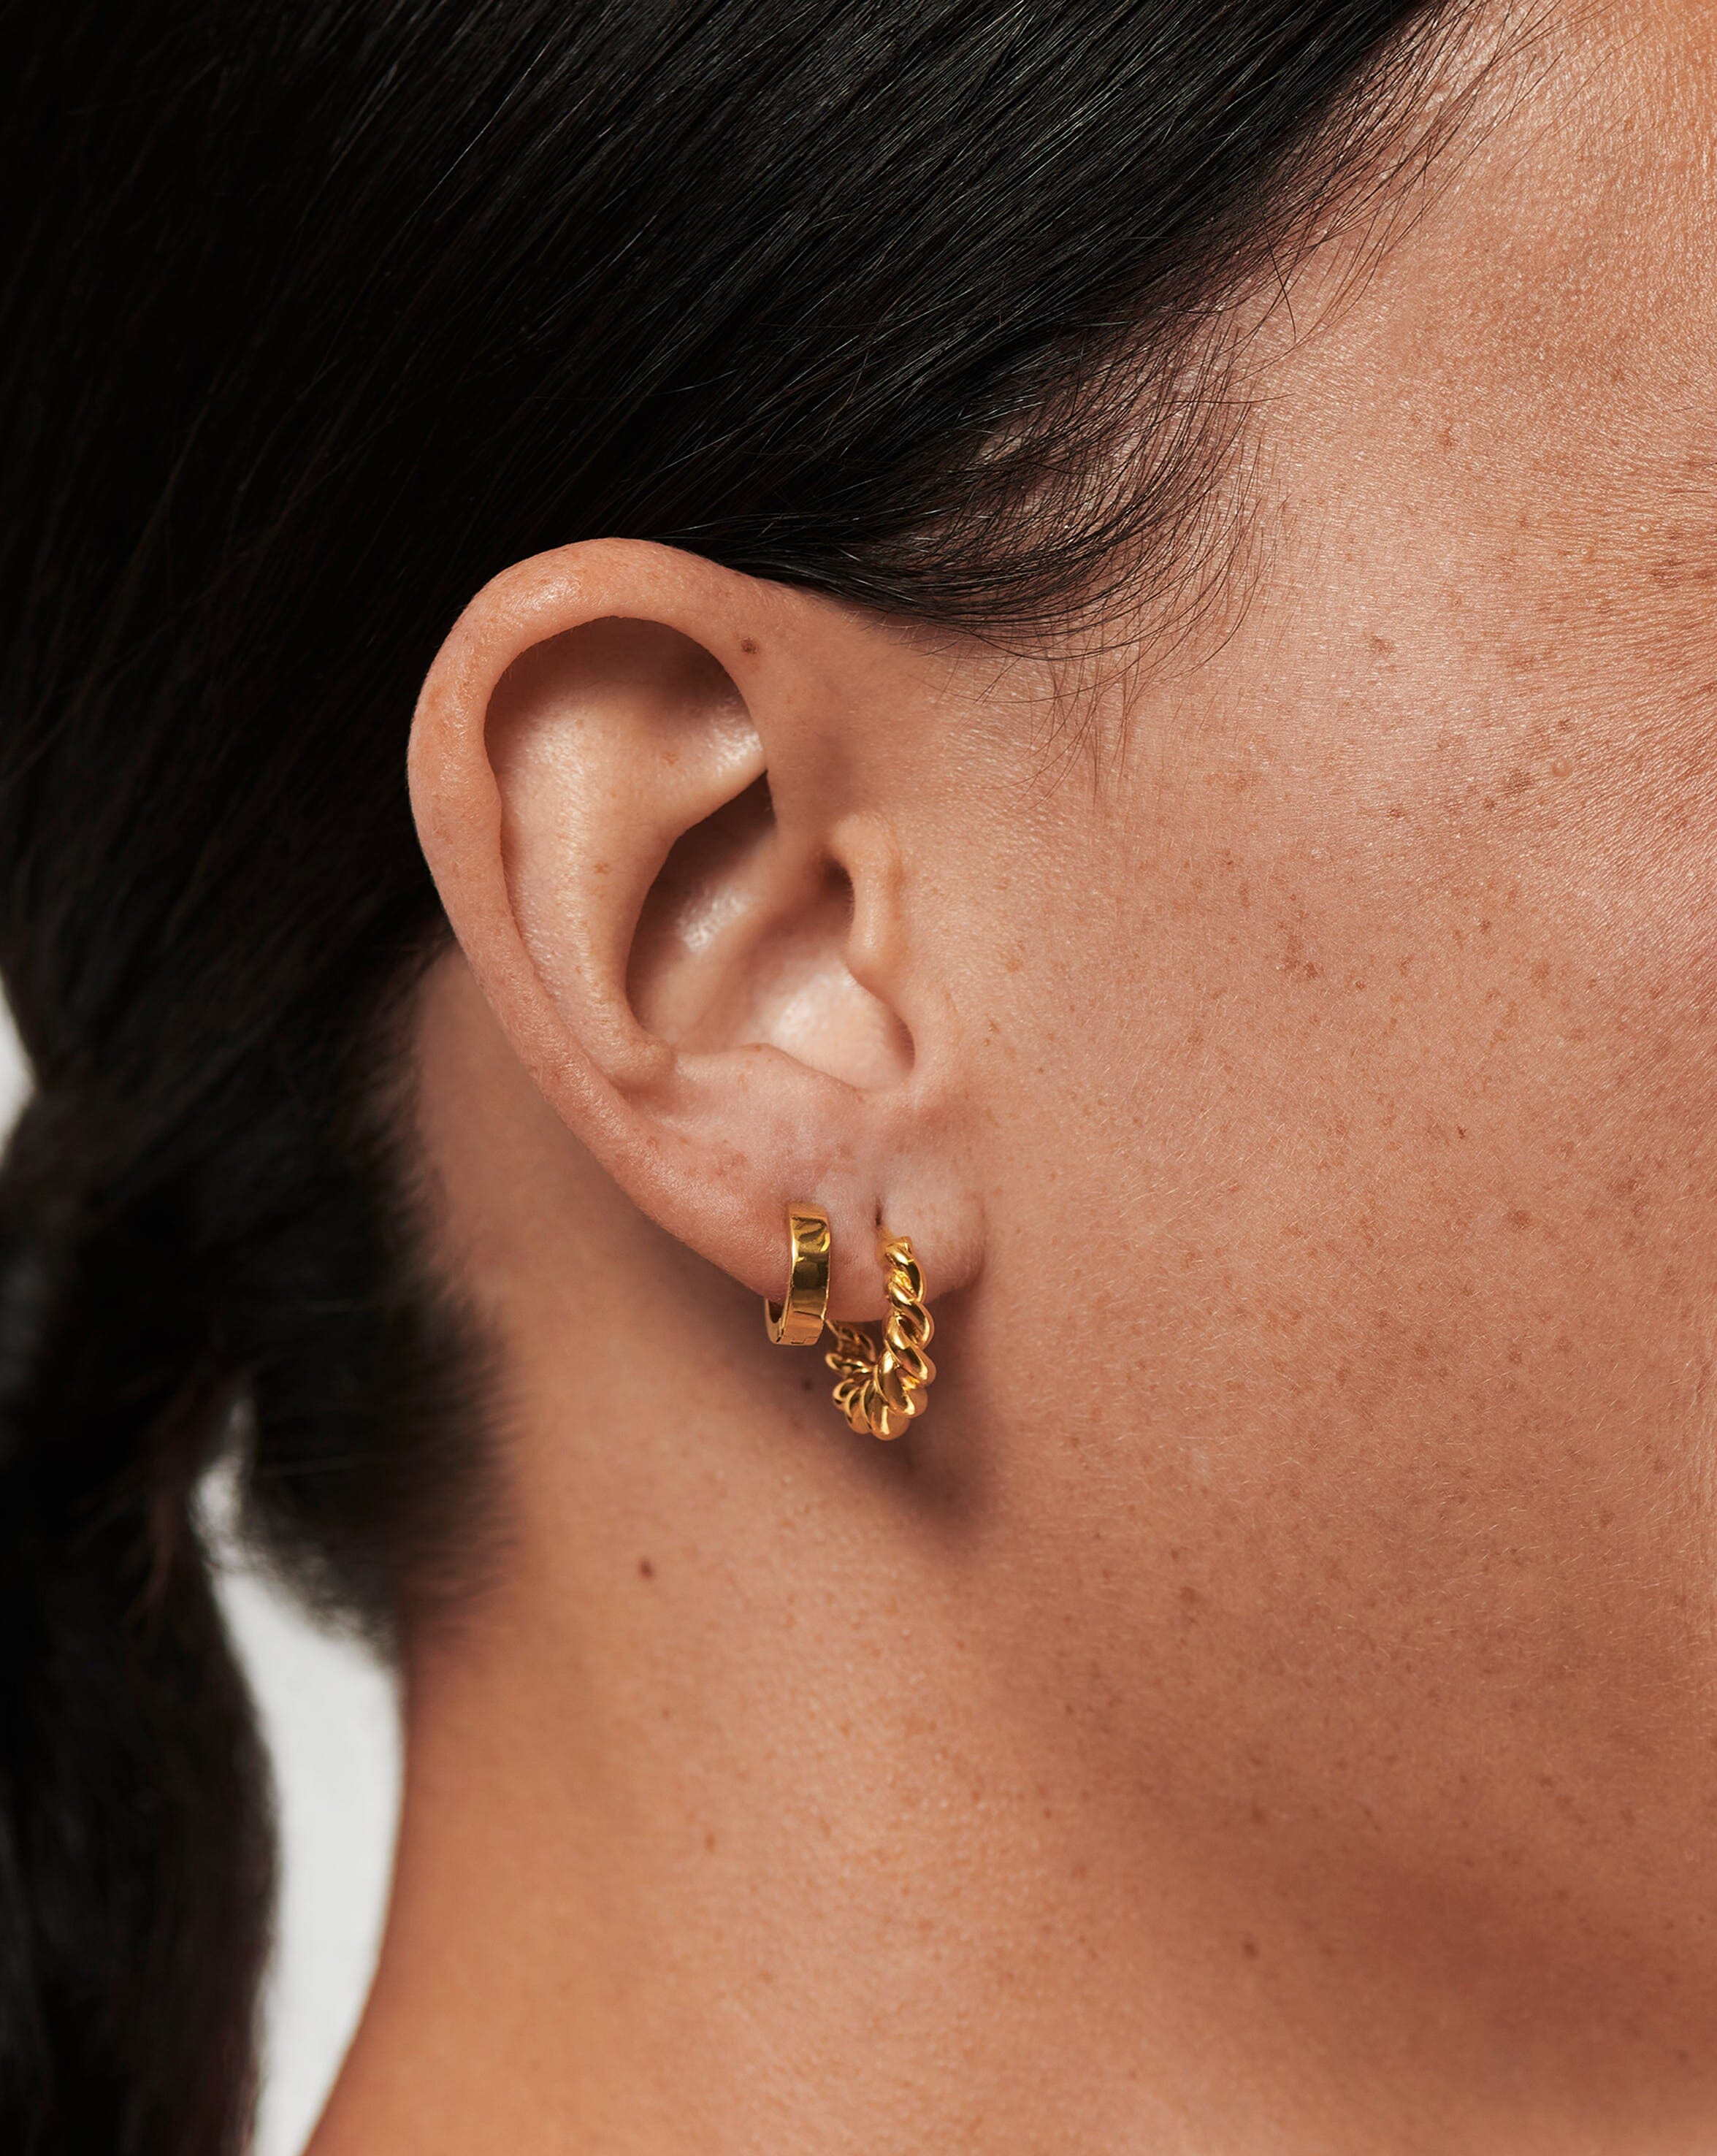 Twisted & Chubby Huggies Earring Set | 18ct Gold Plated Vermeil Earrings Missoma 